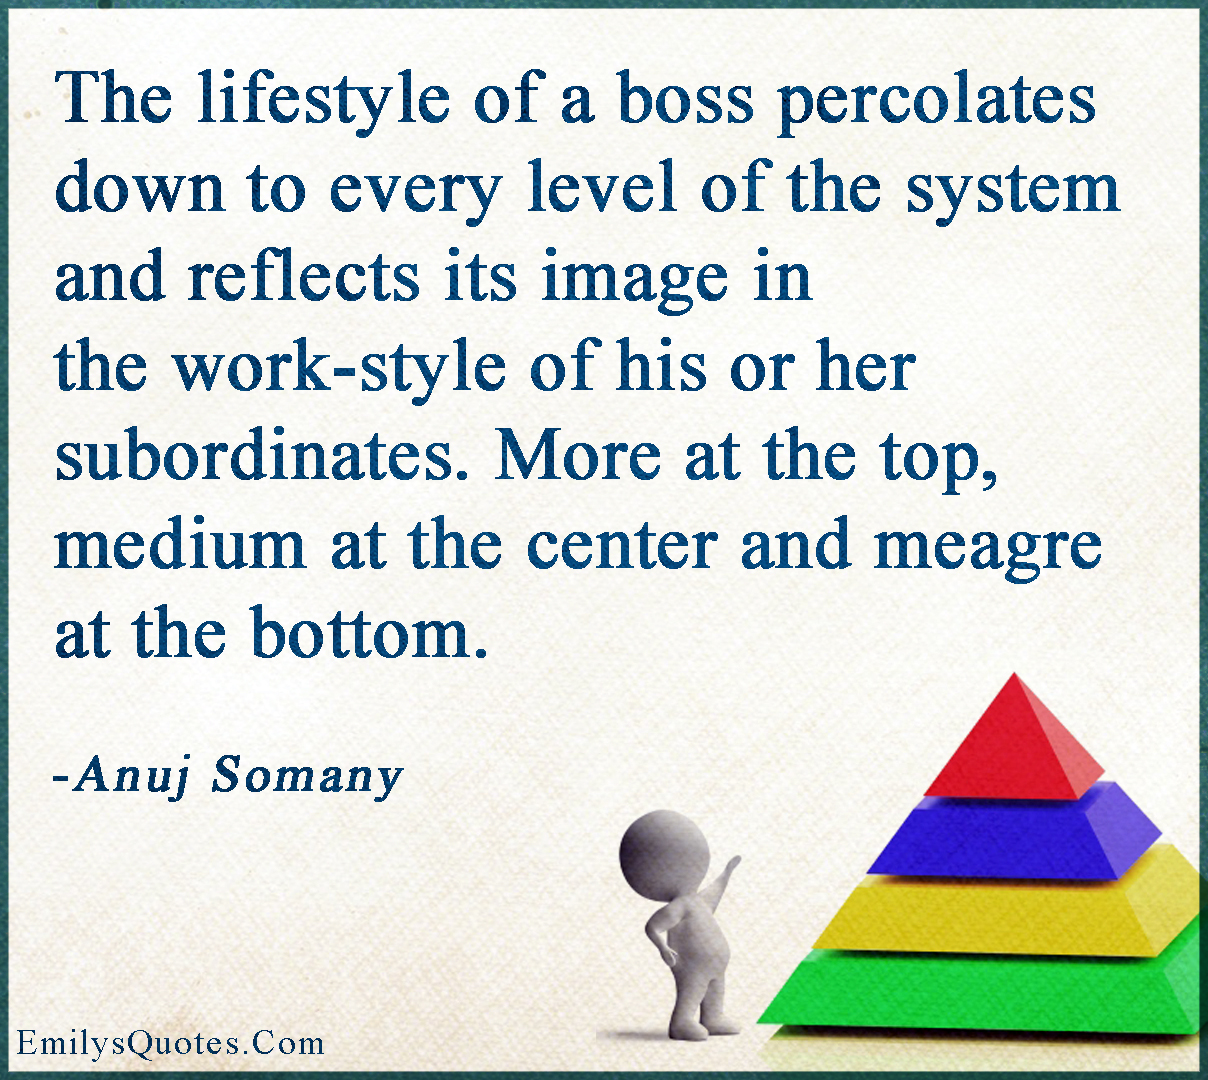 The lifestyle of a boss percolates down to every level of the system and reflects